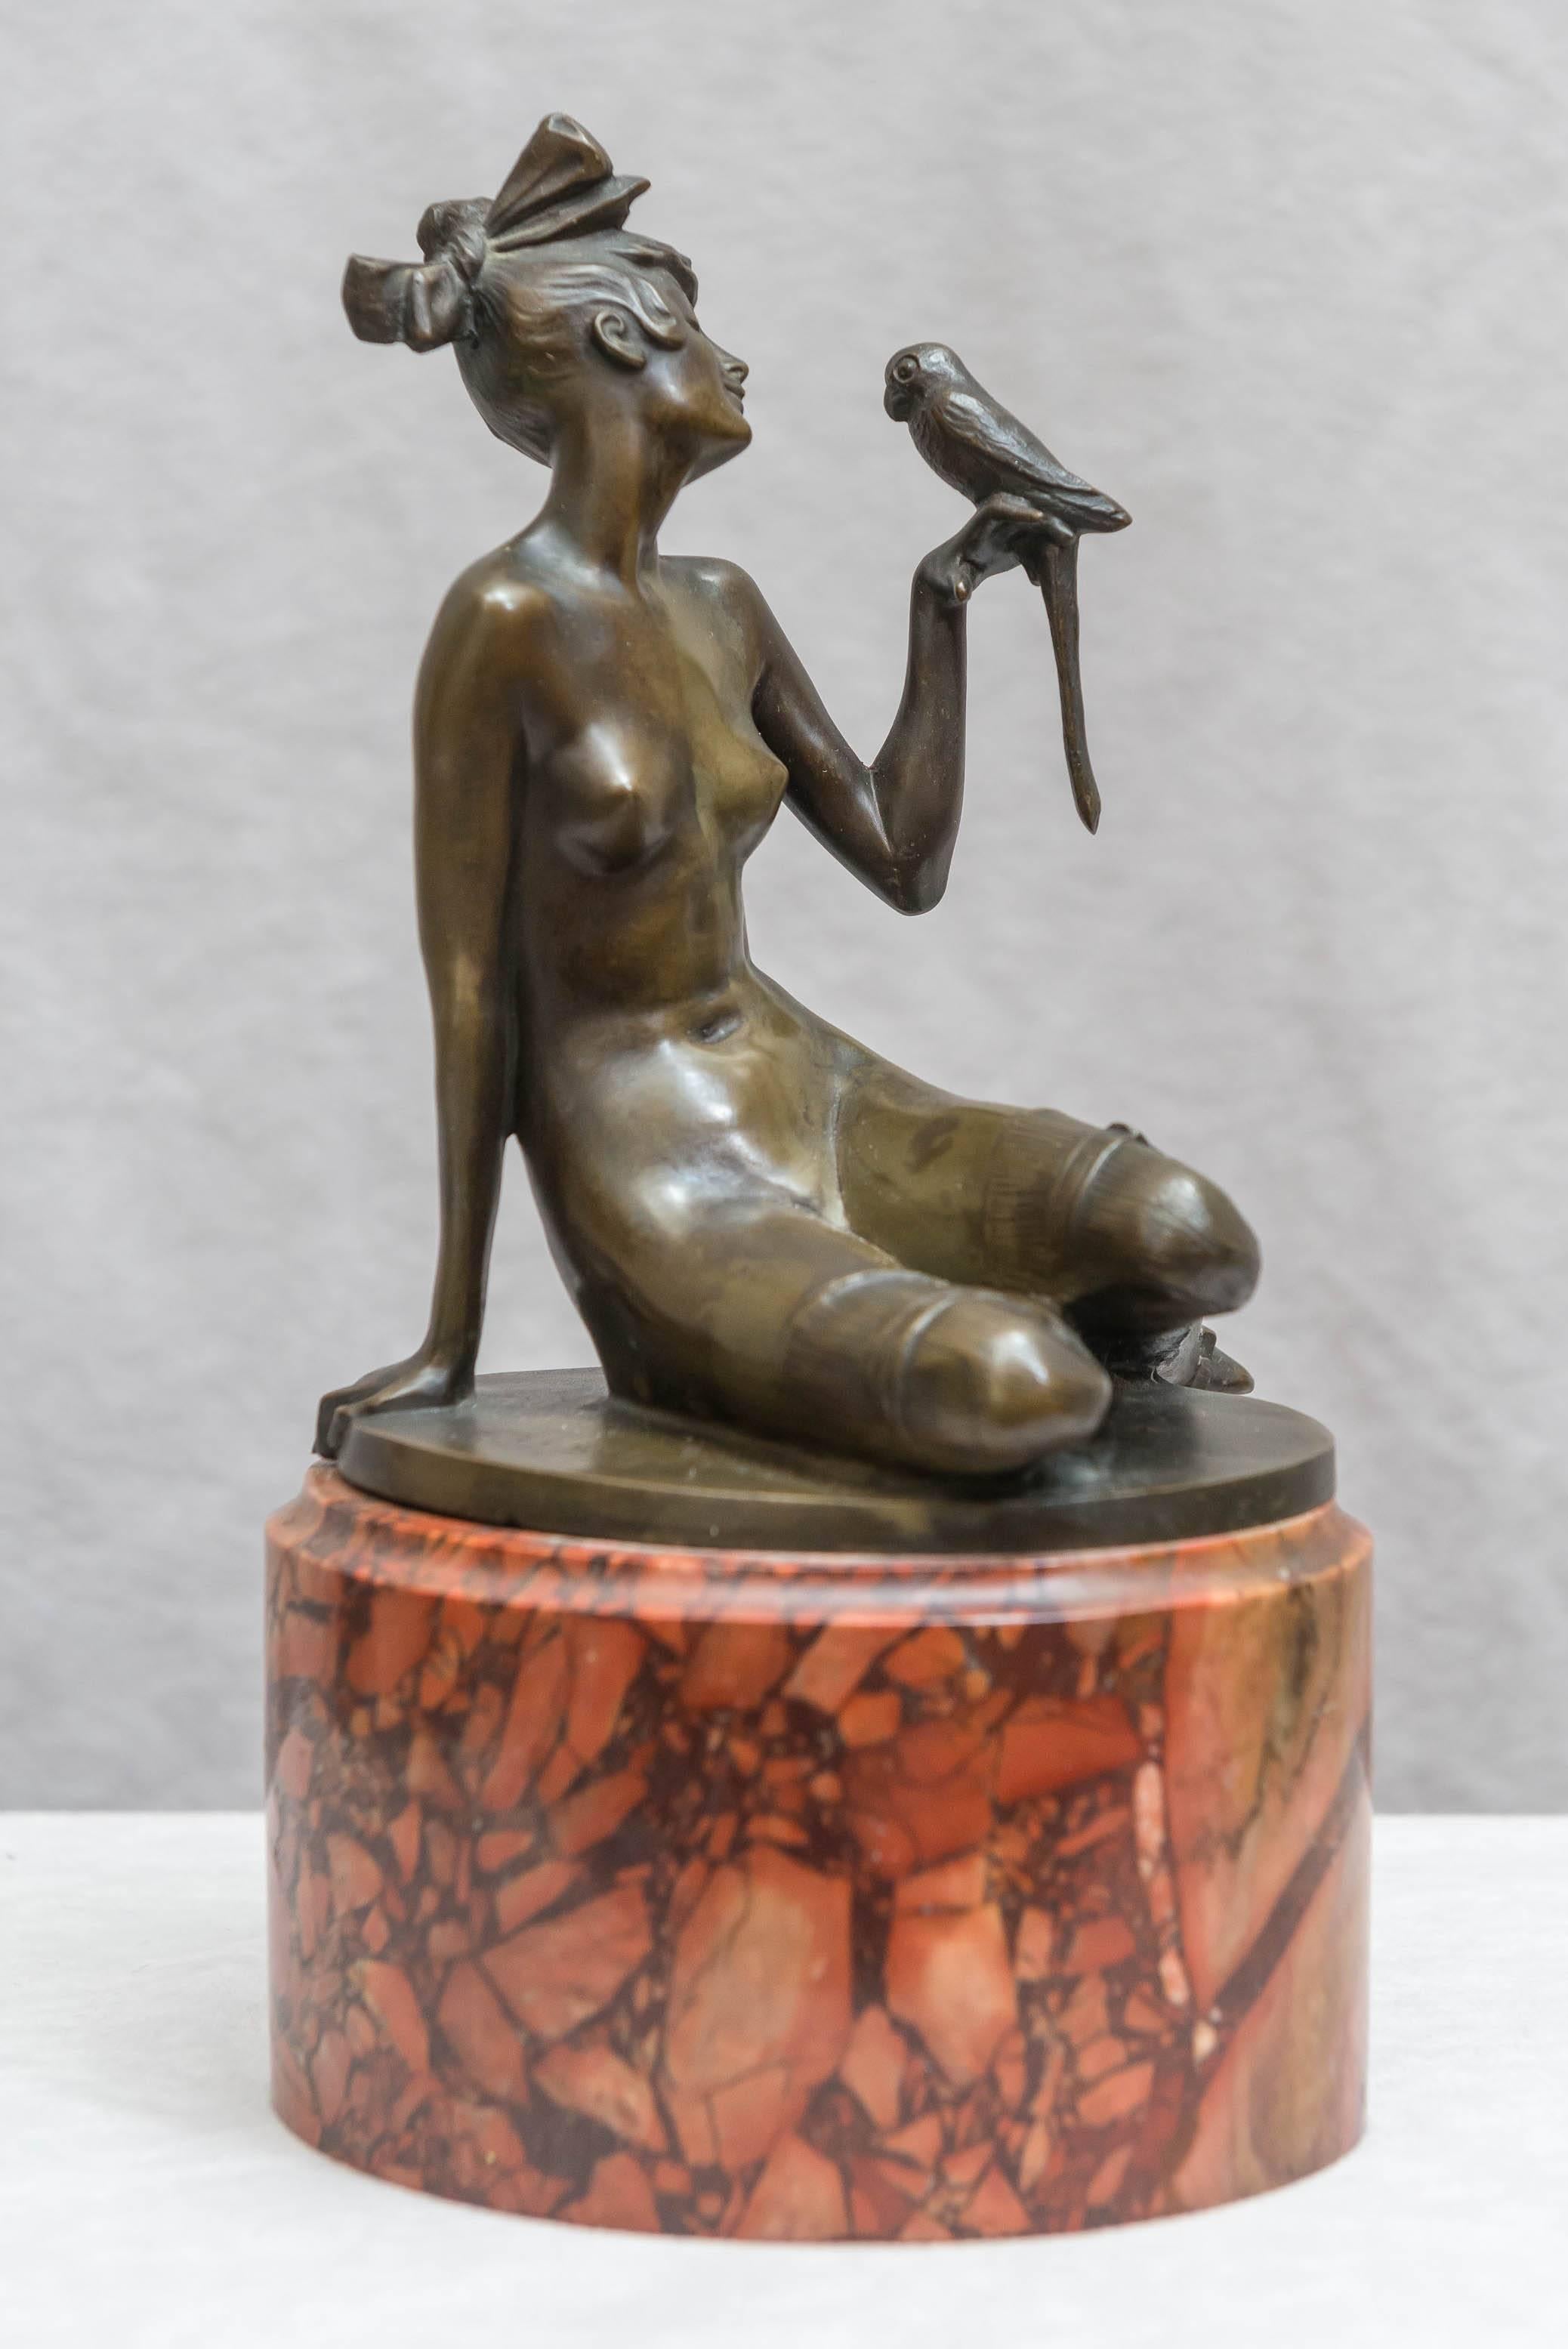 Hand-Crafted Art Deco Bronze Group of a Nude Woman Holding a Parrot, Red Marble Base